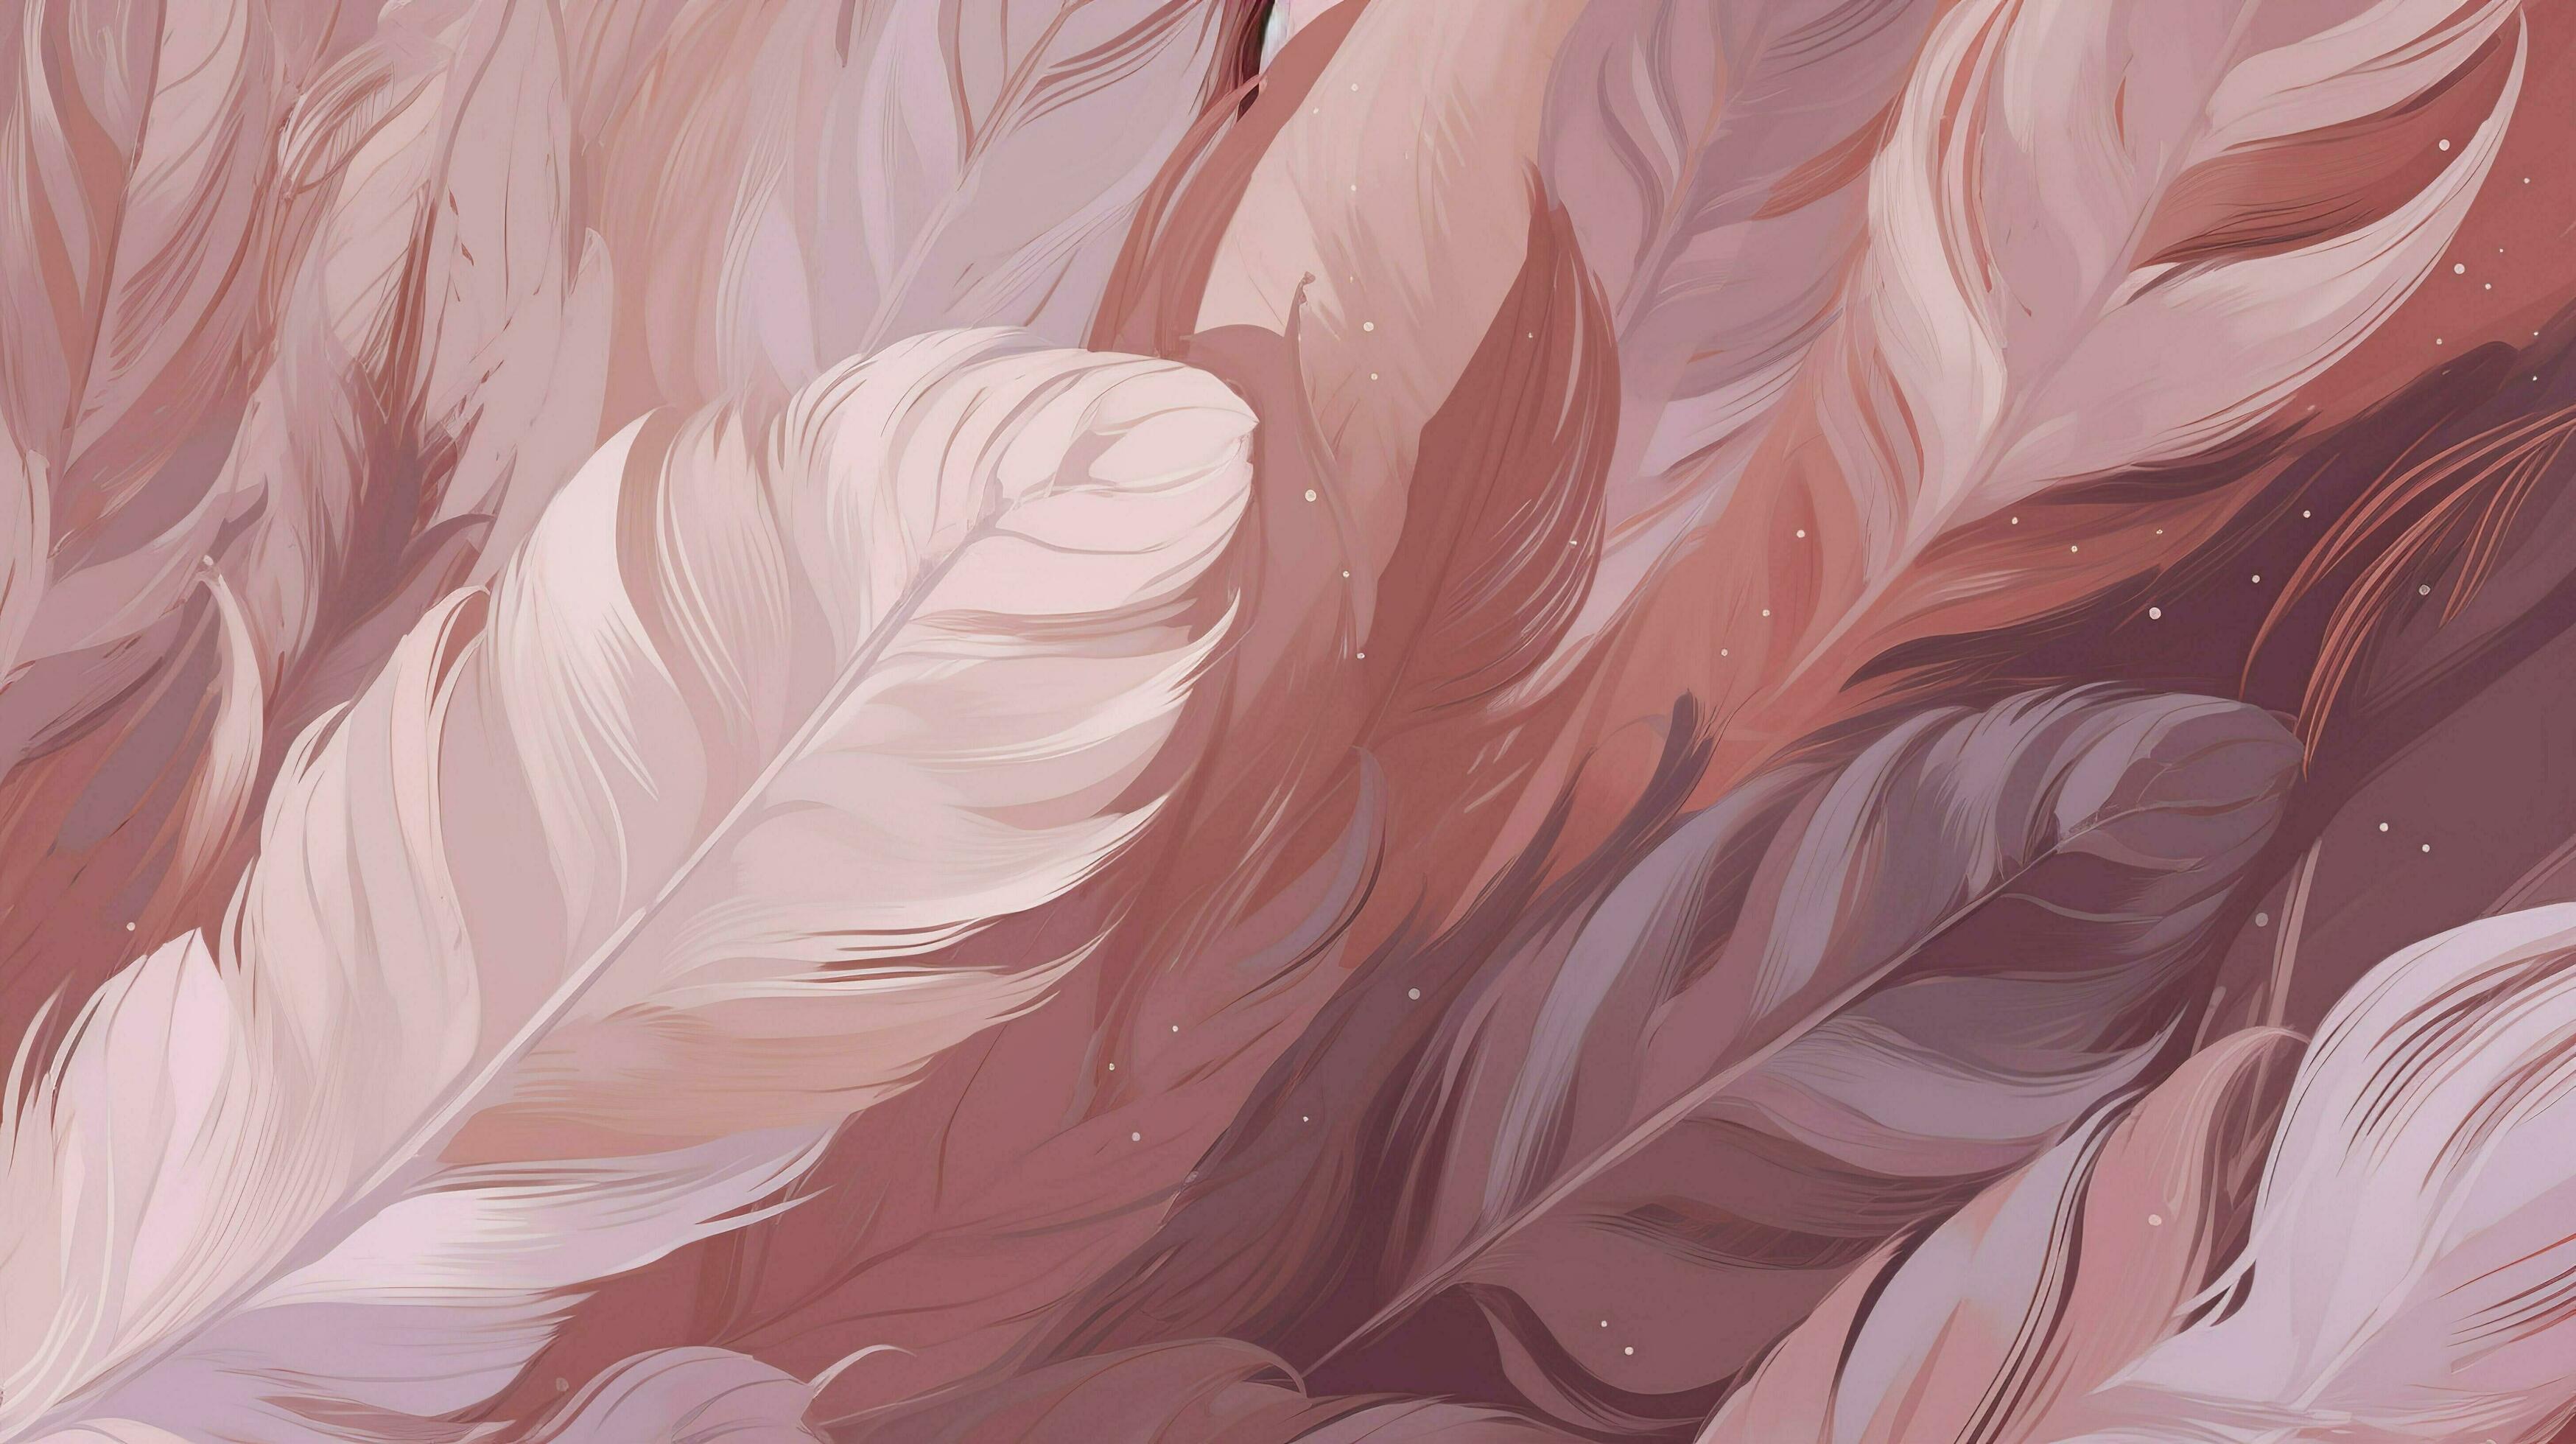 Colored feathers in pink on the background, in the style of subtle shading, anime aesthetic, wallpaper, pigeoncore, free brushwork, translucent color. - Feathers